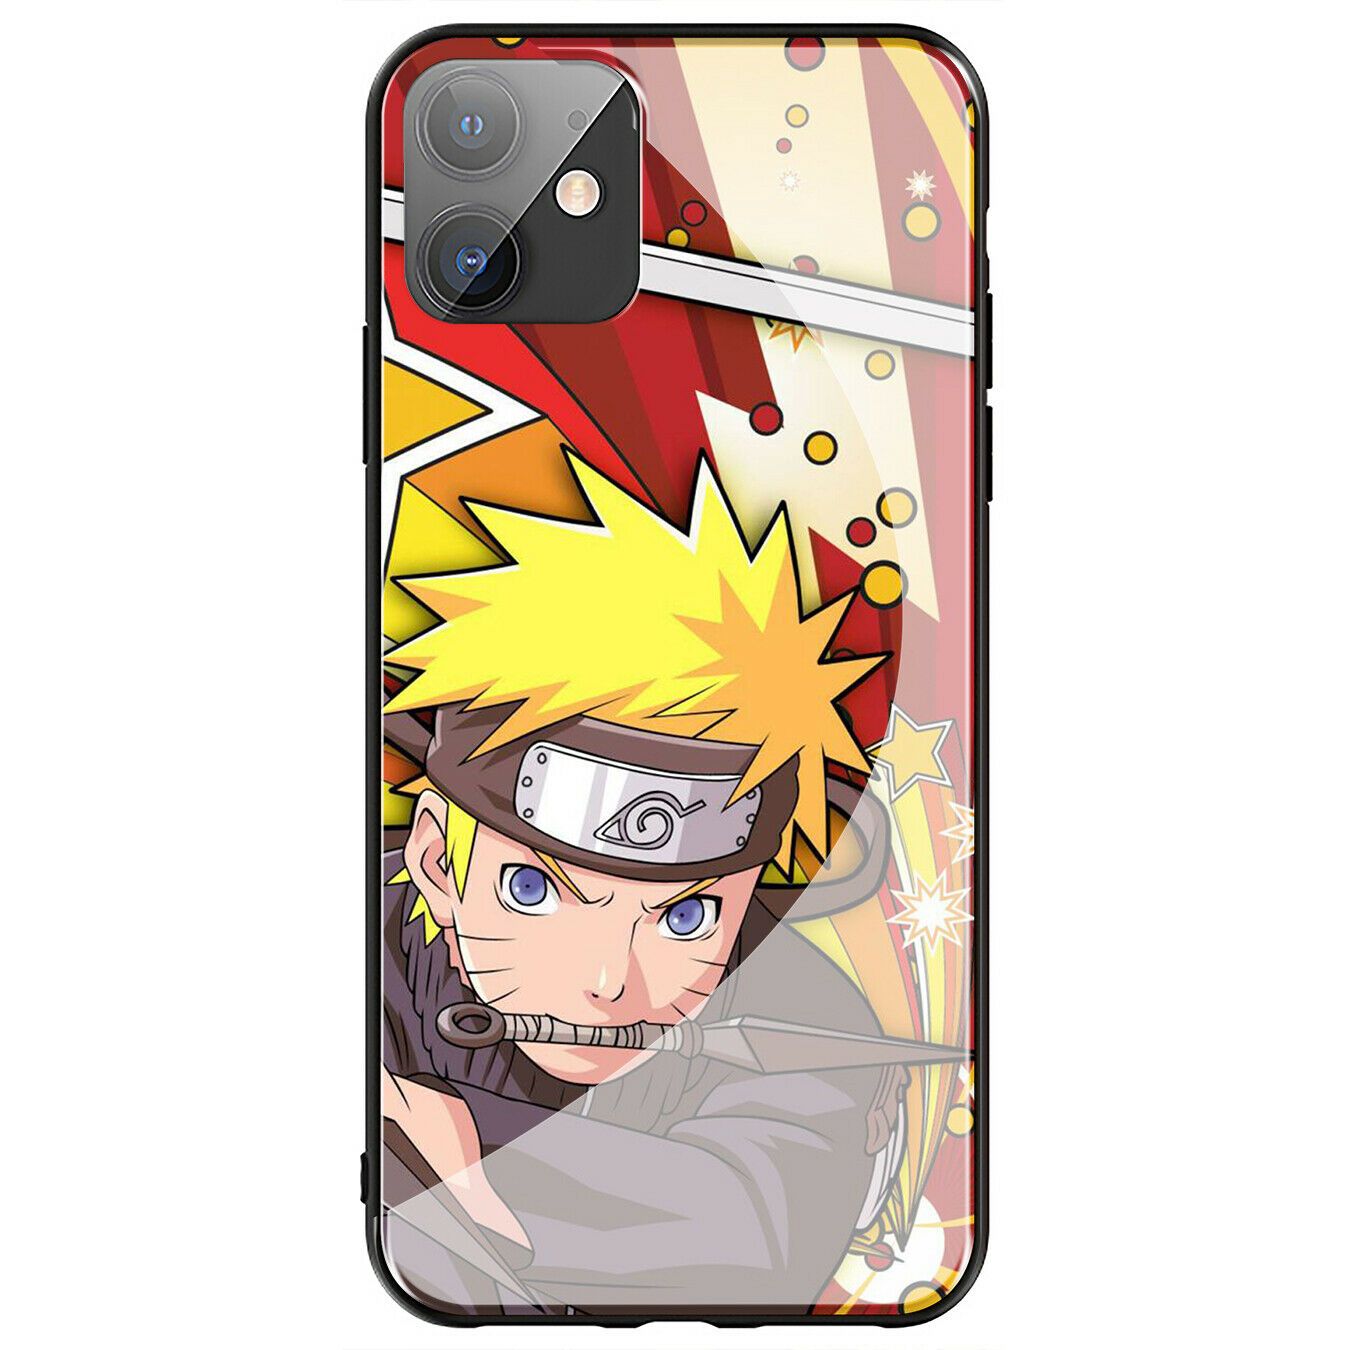 Sasuke NARUTO Akatsuki Glass Case for iPhone 11 Pro XR X XS Max 8 7 6 6s Plus + iPhone Cases AtlasCase 8 for iPhone 6/6S 